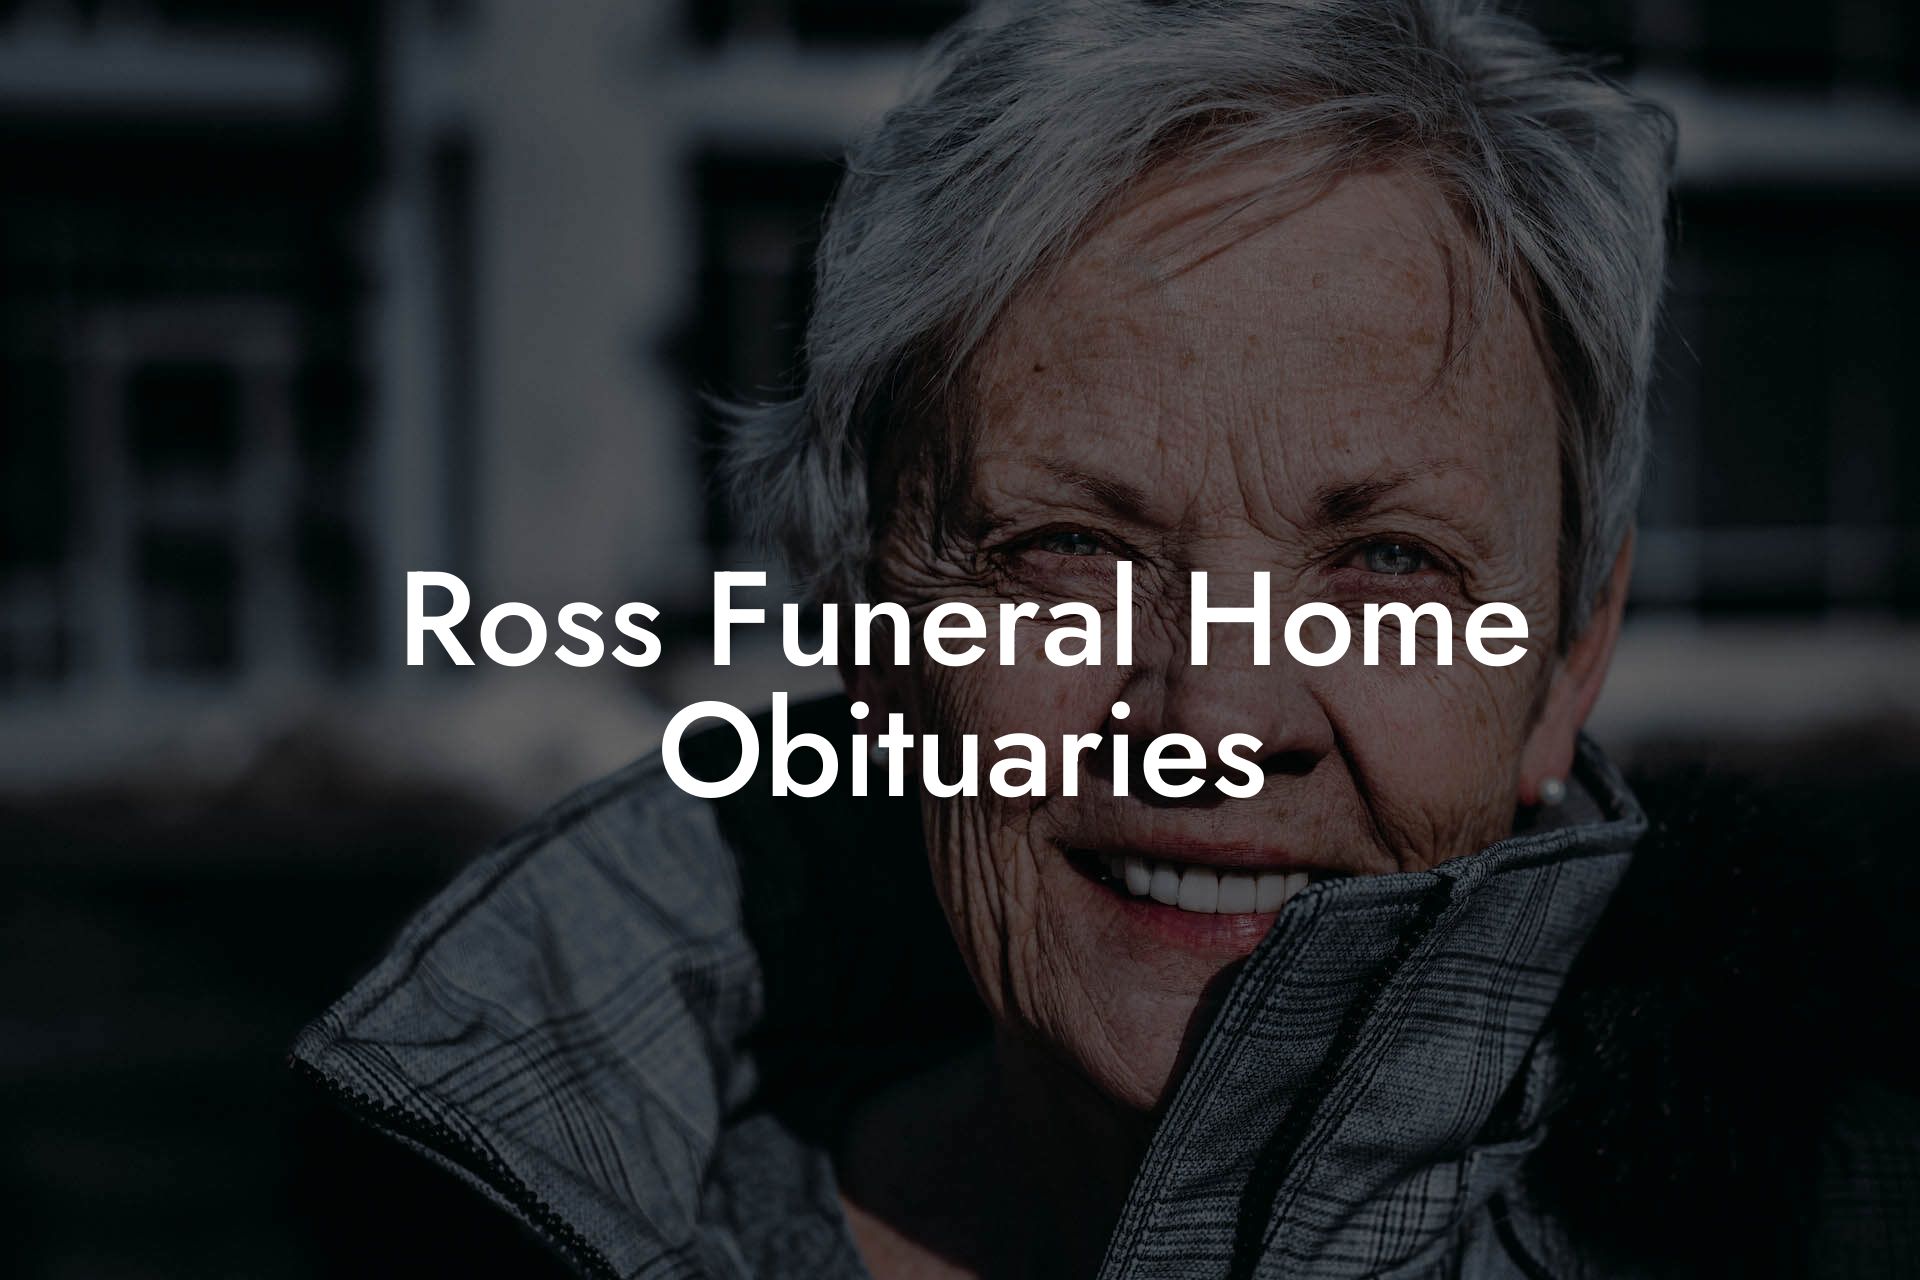 Ross Funeral Home Obituaries